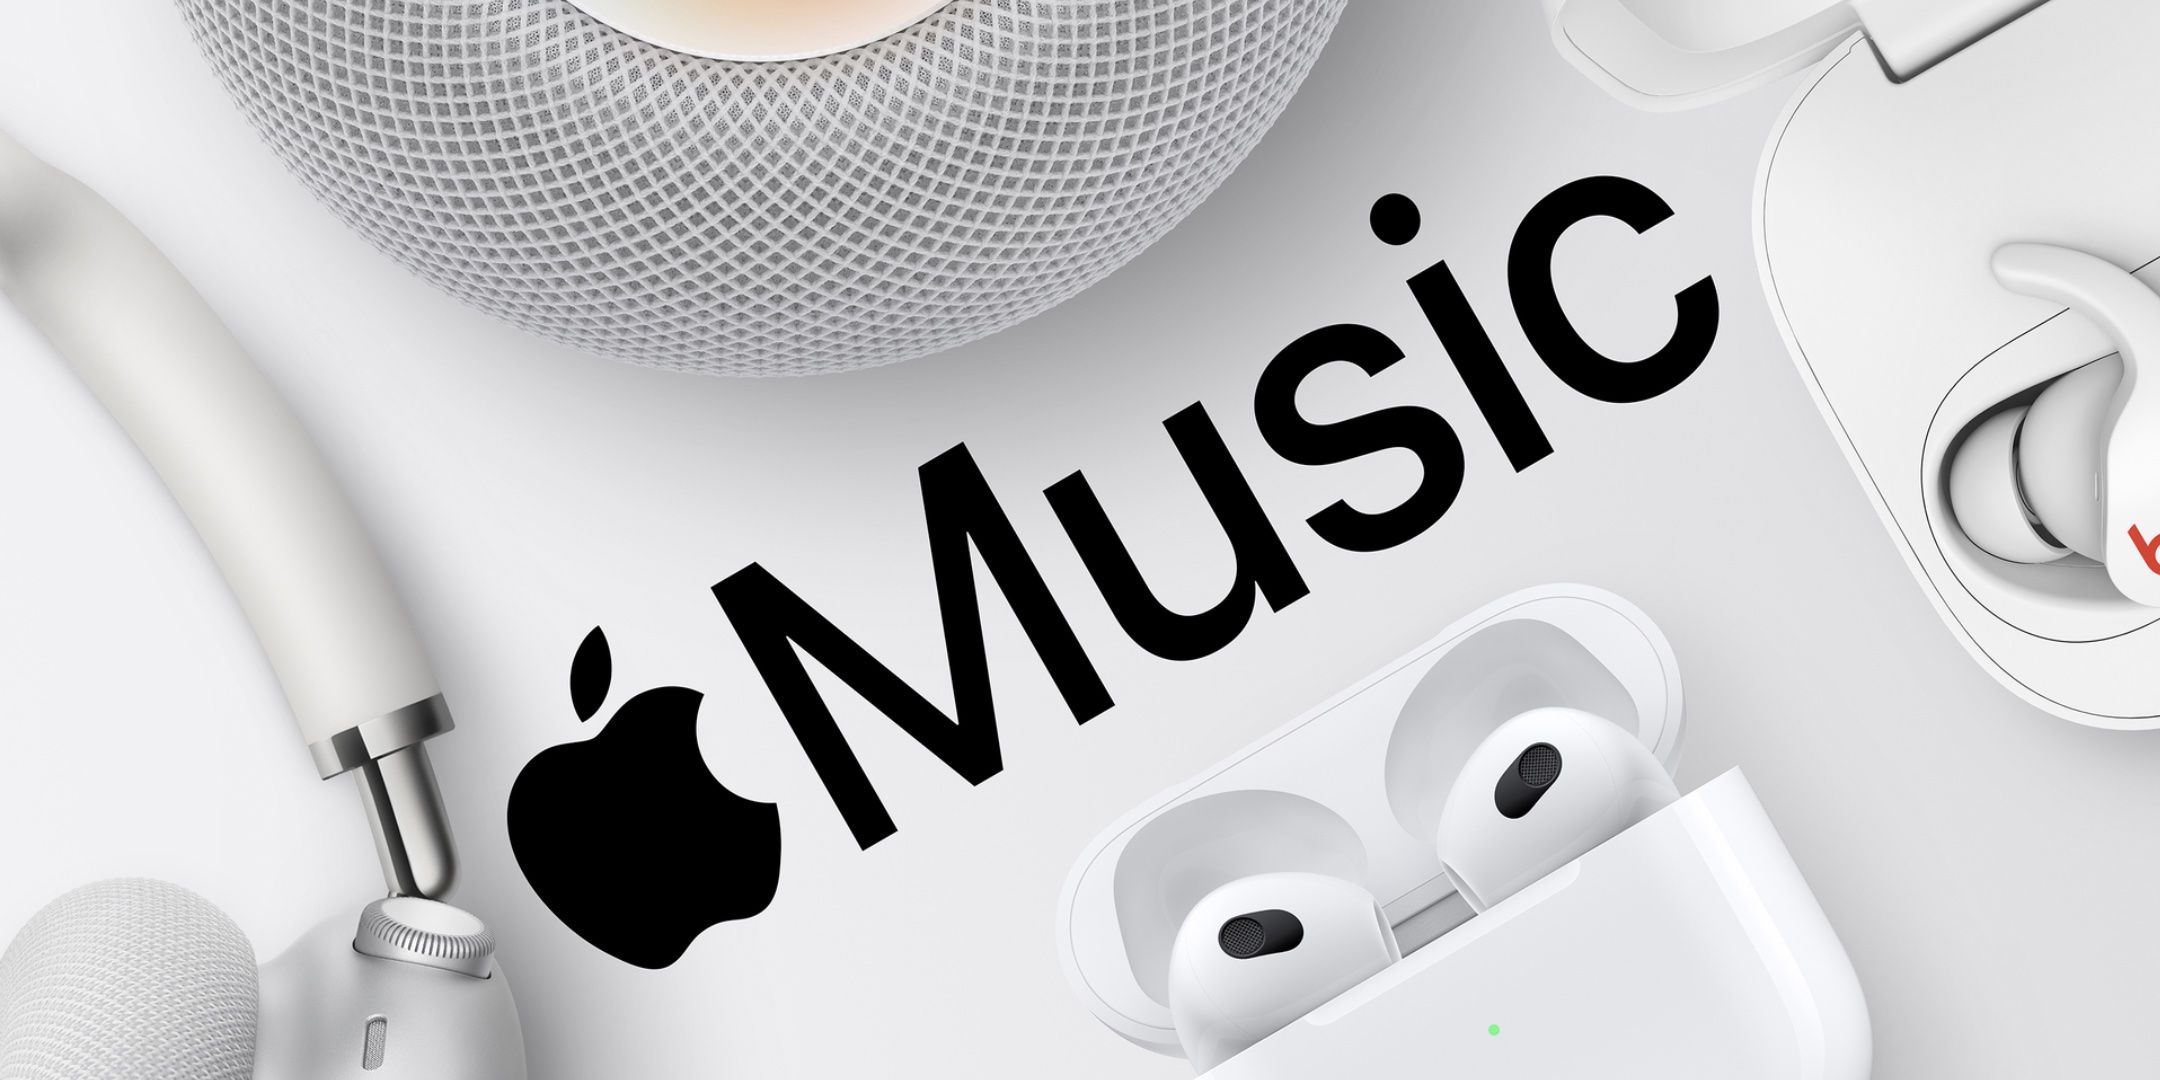 HomePod and Apple Earbuds with Apple Music.